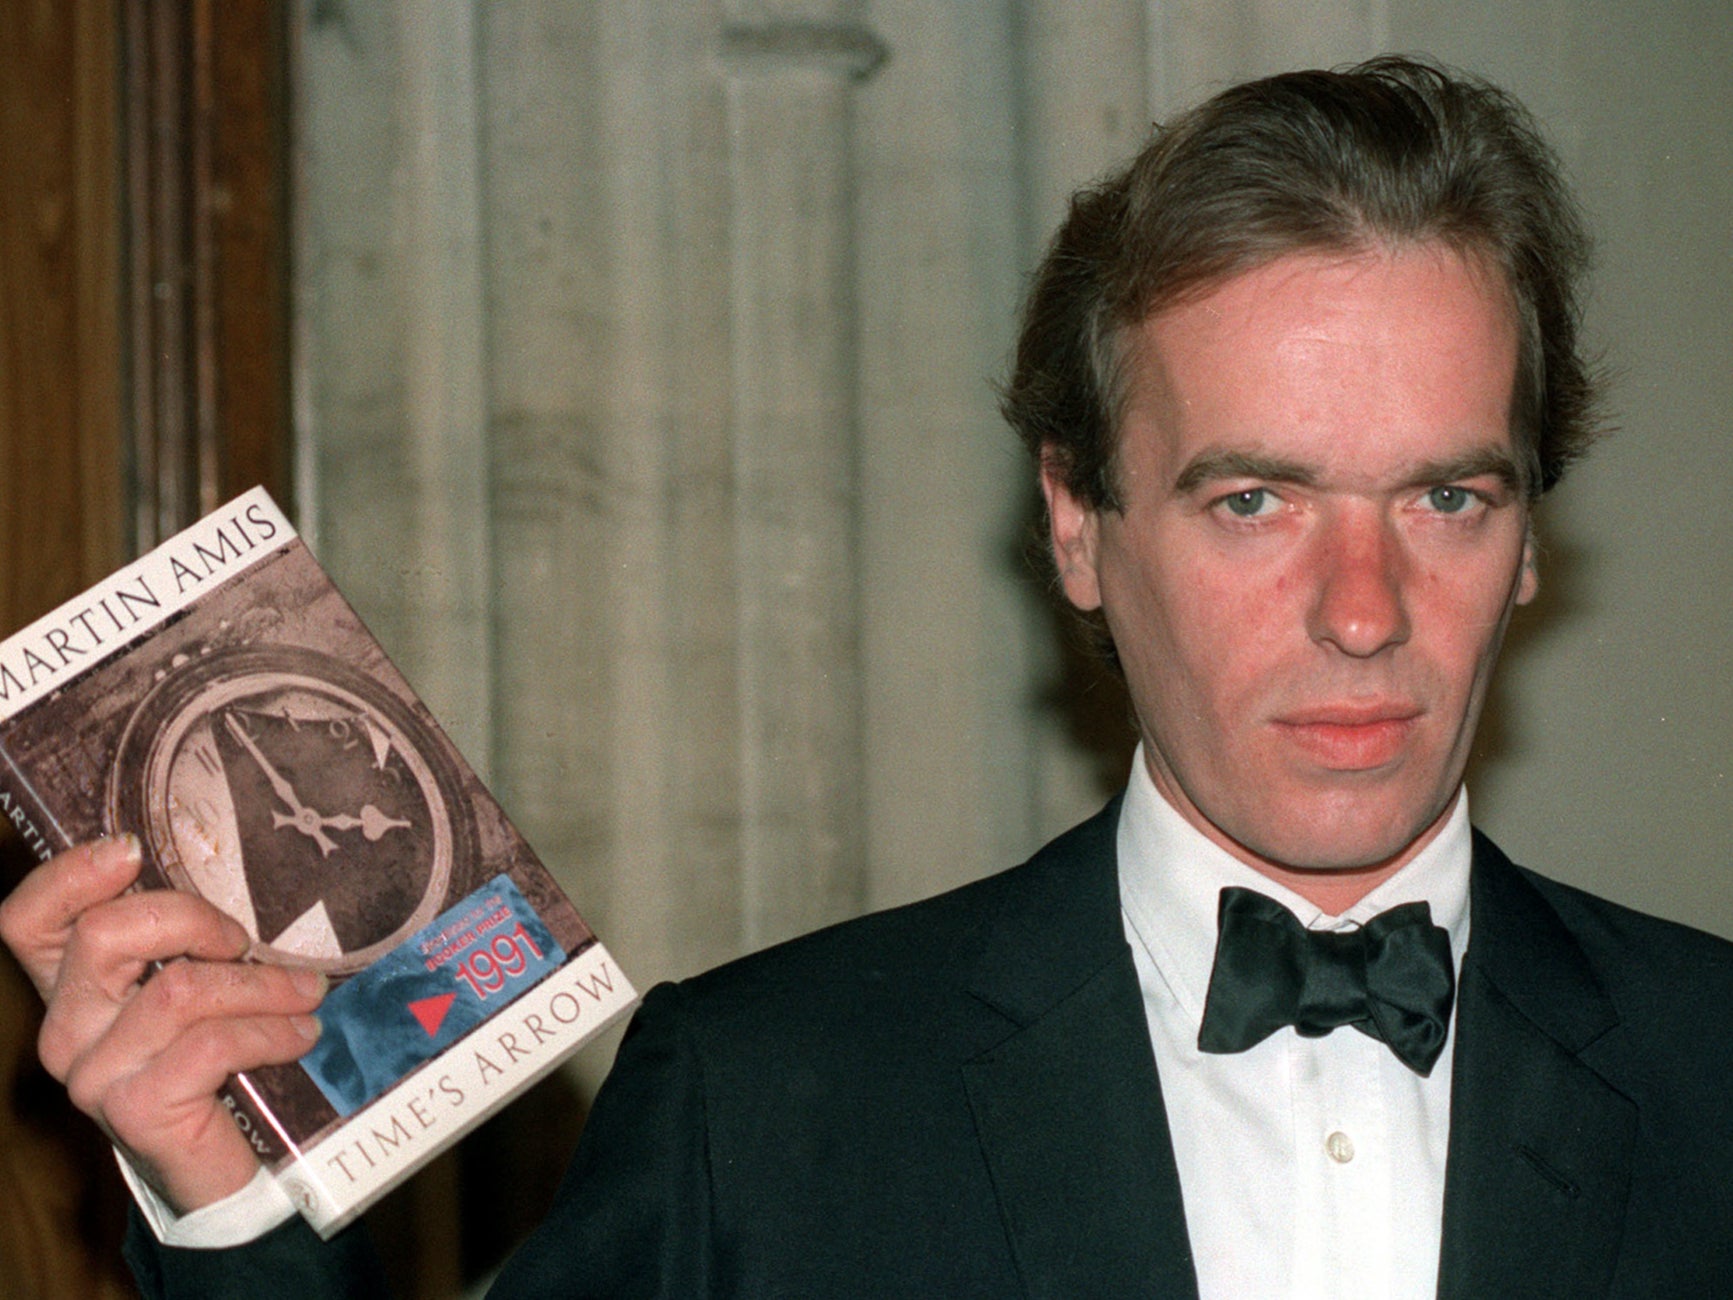 In 1991 at the Booker Prize ceremony in London